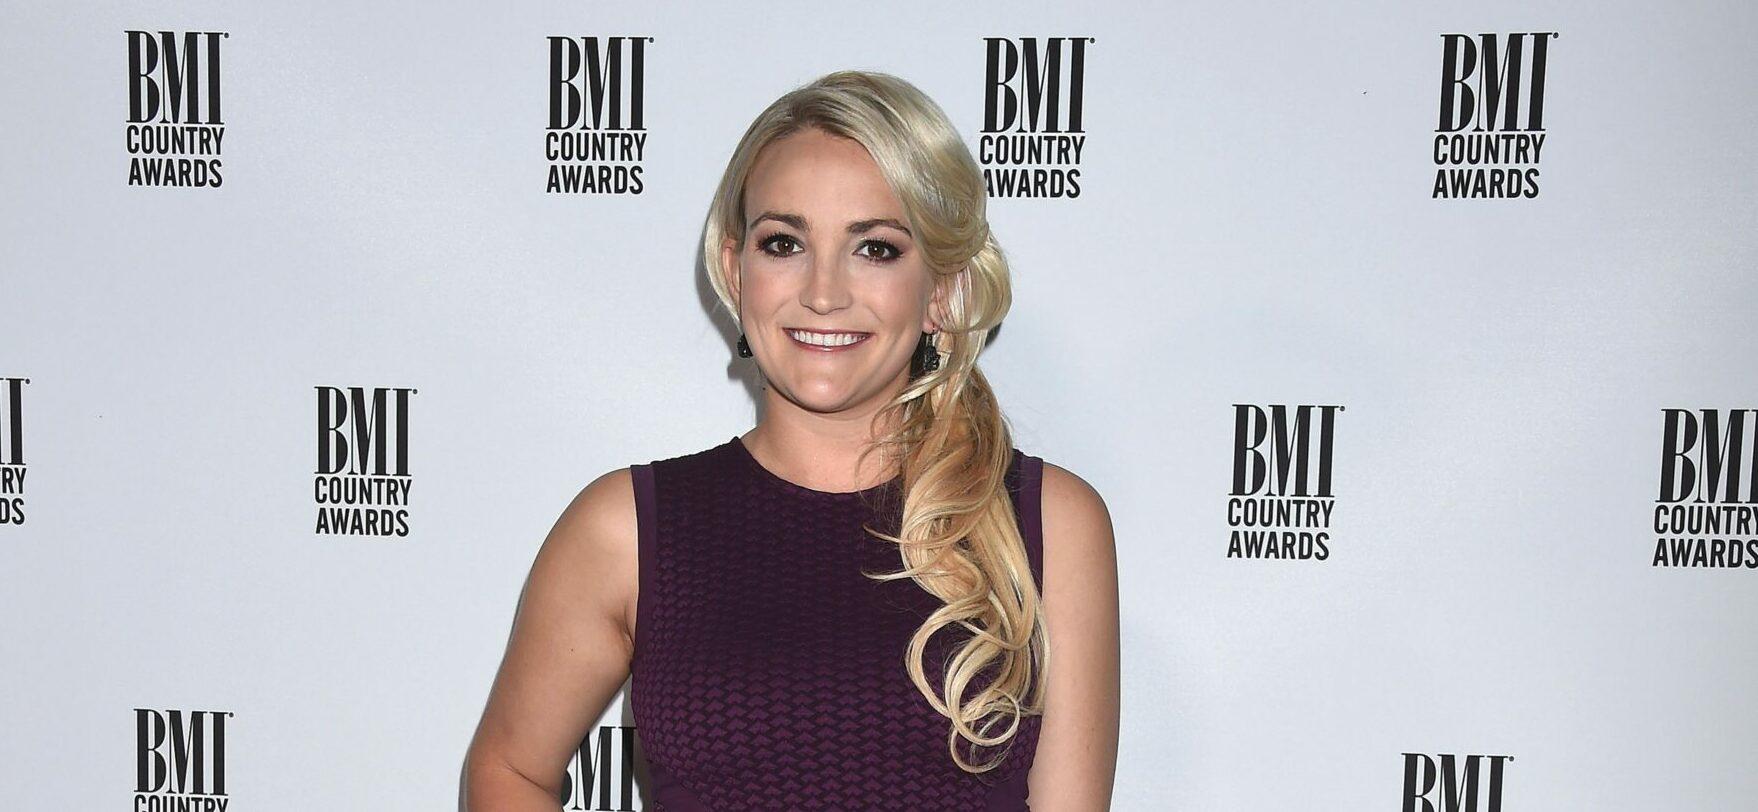 Jamie Lynn Spears Breaks Silence On ‘Dancing With The Stars’ Exit